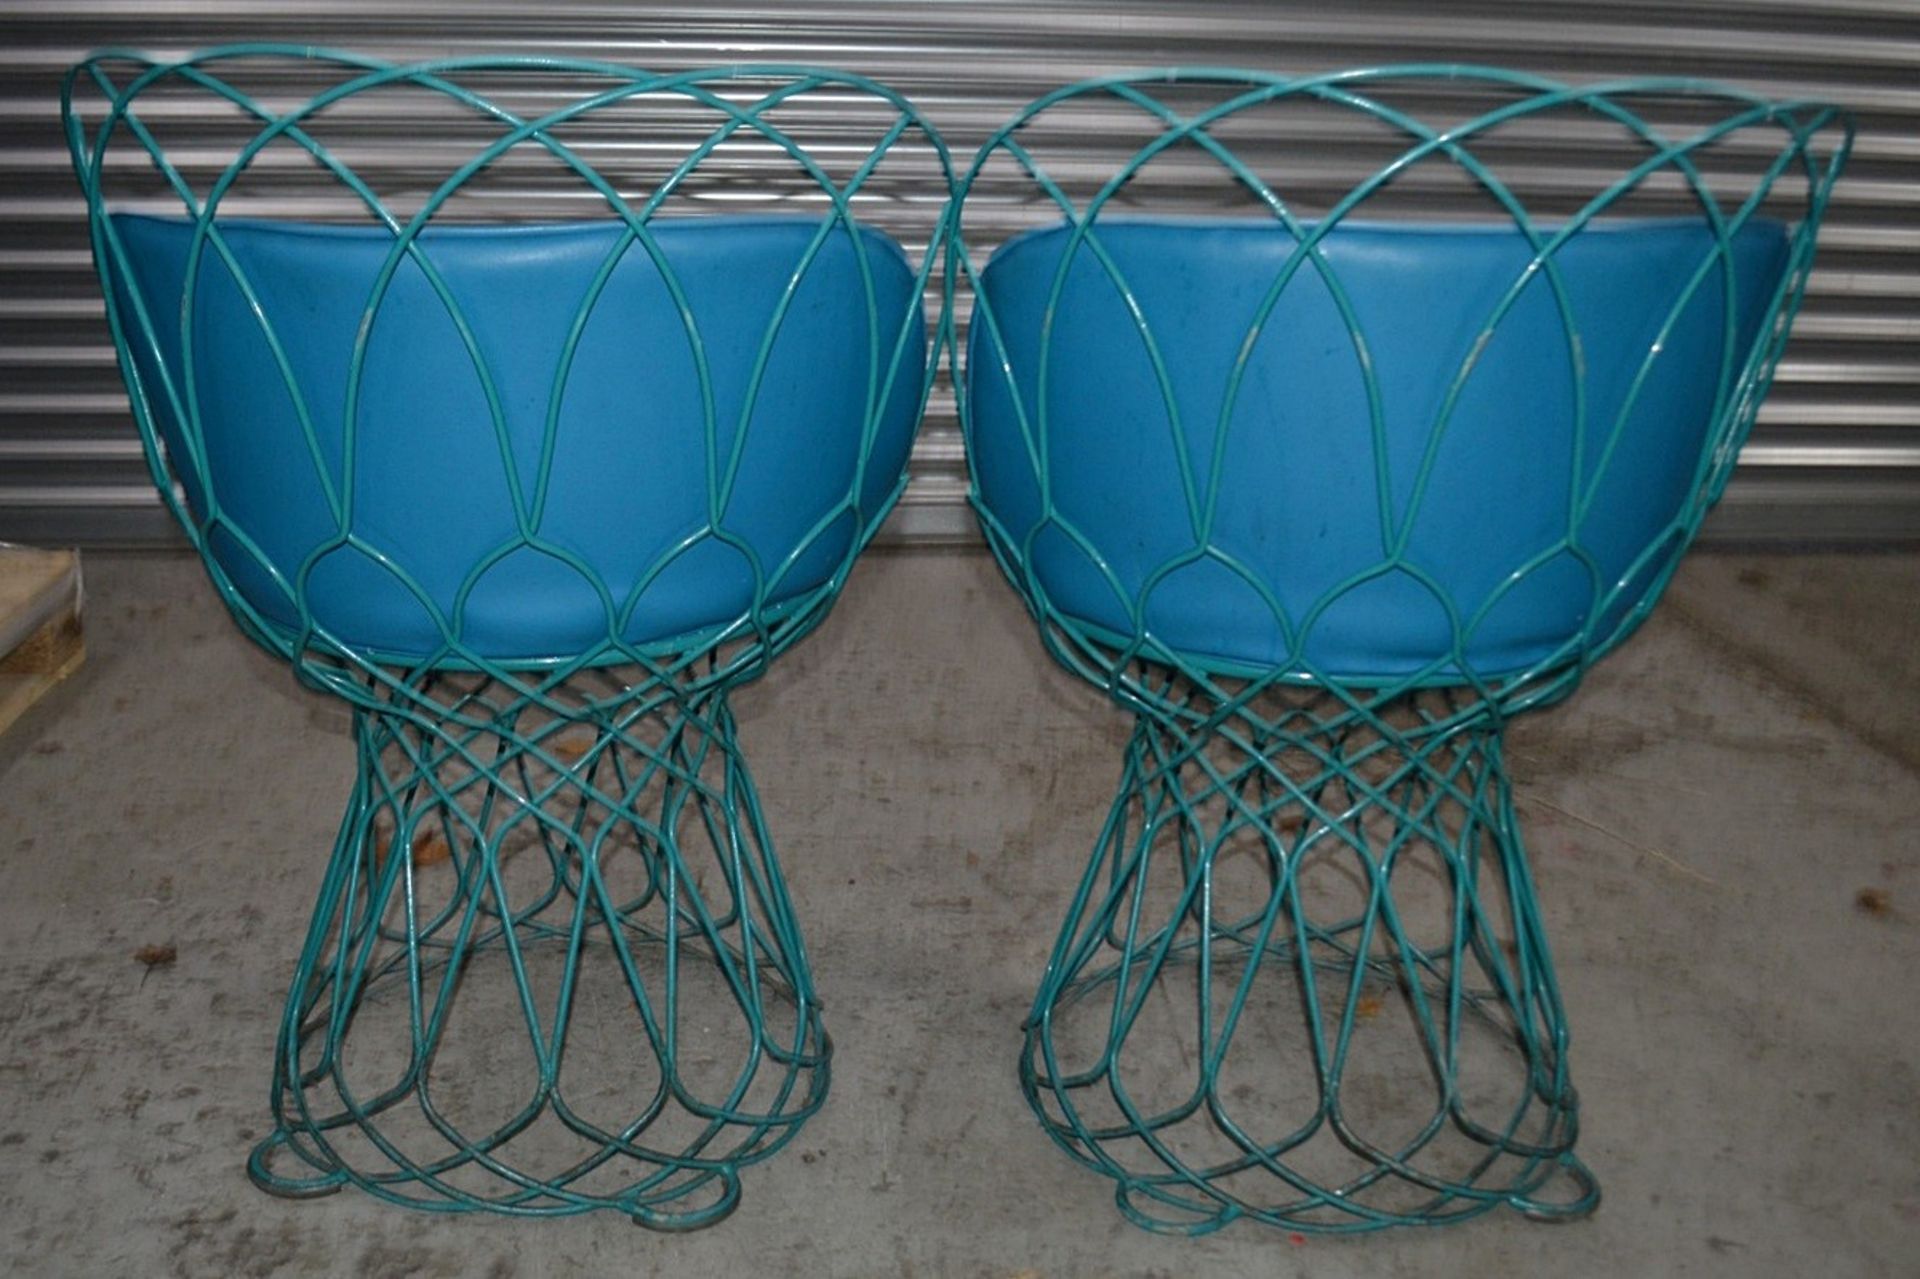 2 x Commercial Outdoor Wire Bistro Chairs With Padded Seats In Blue - Dimensions: H80 x W62 x D45cm - Image 2 of 7